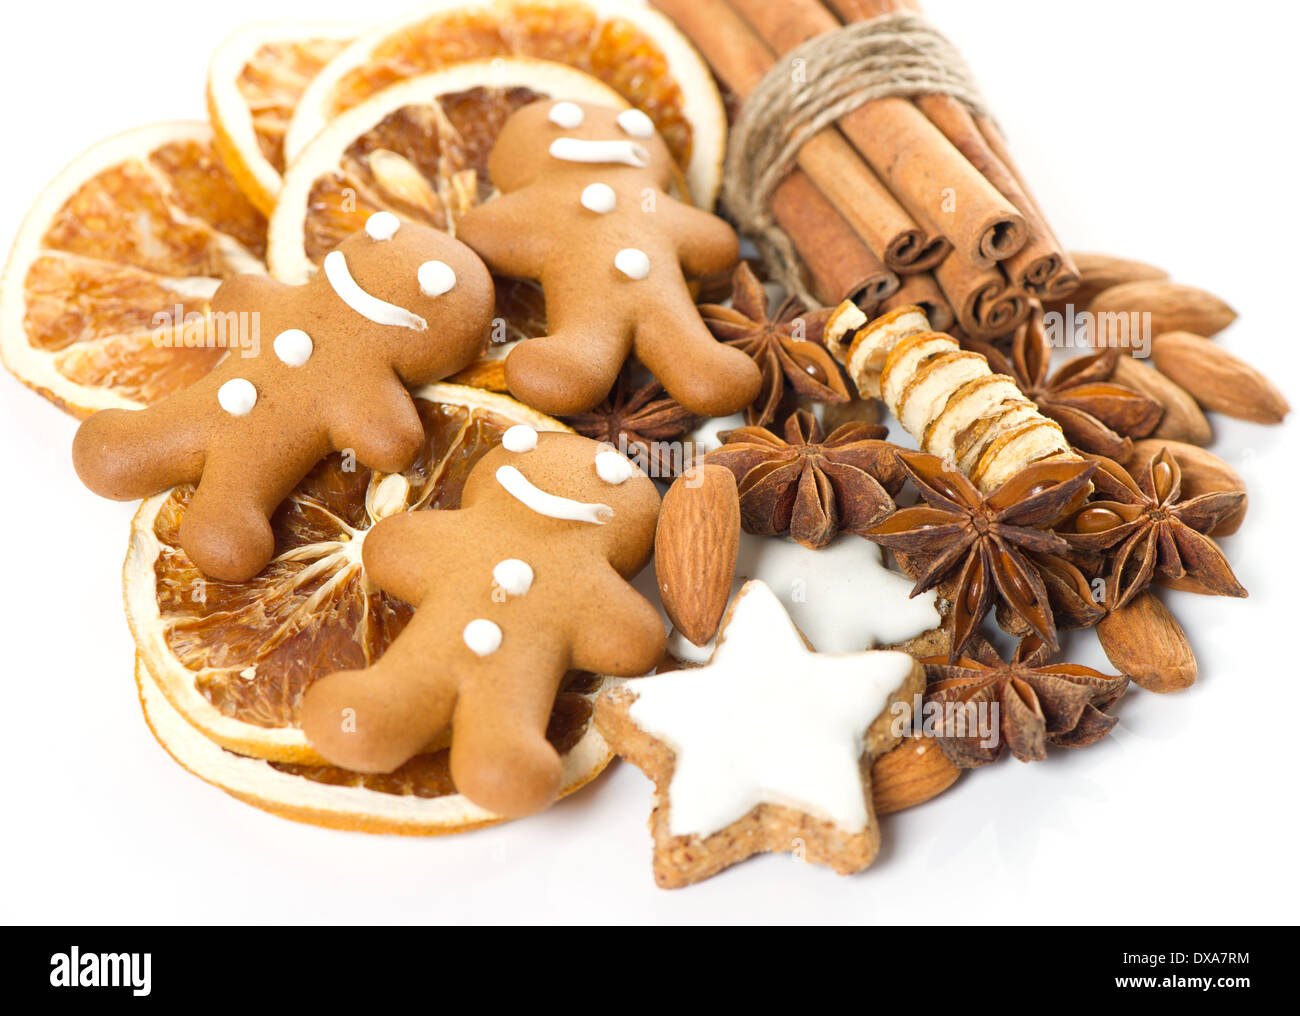 gingerbread man christmas cookies with anise stars and cinnamon sticks Stock Photo